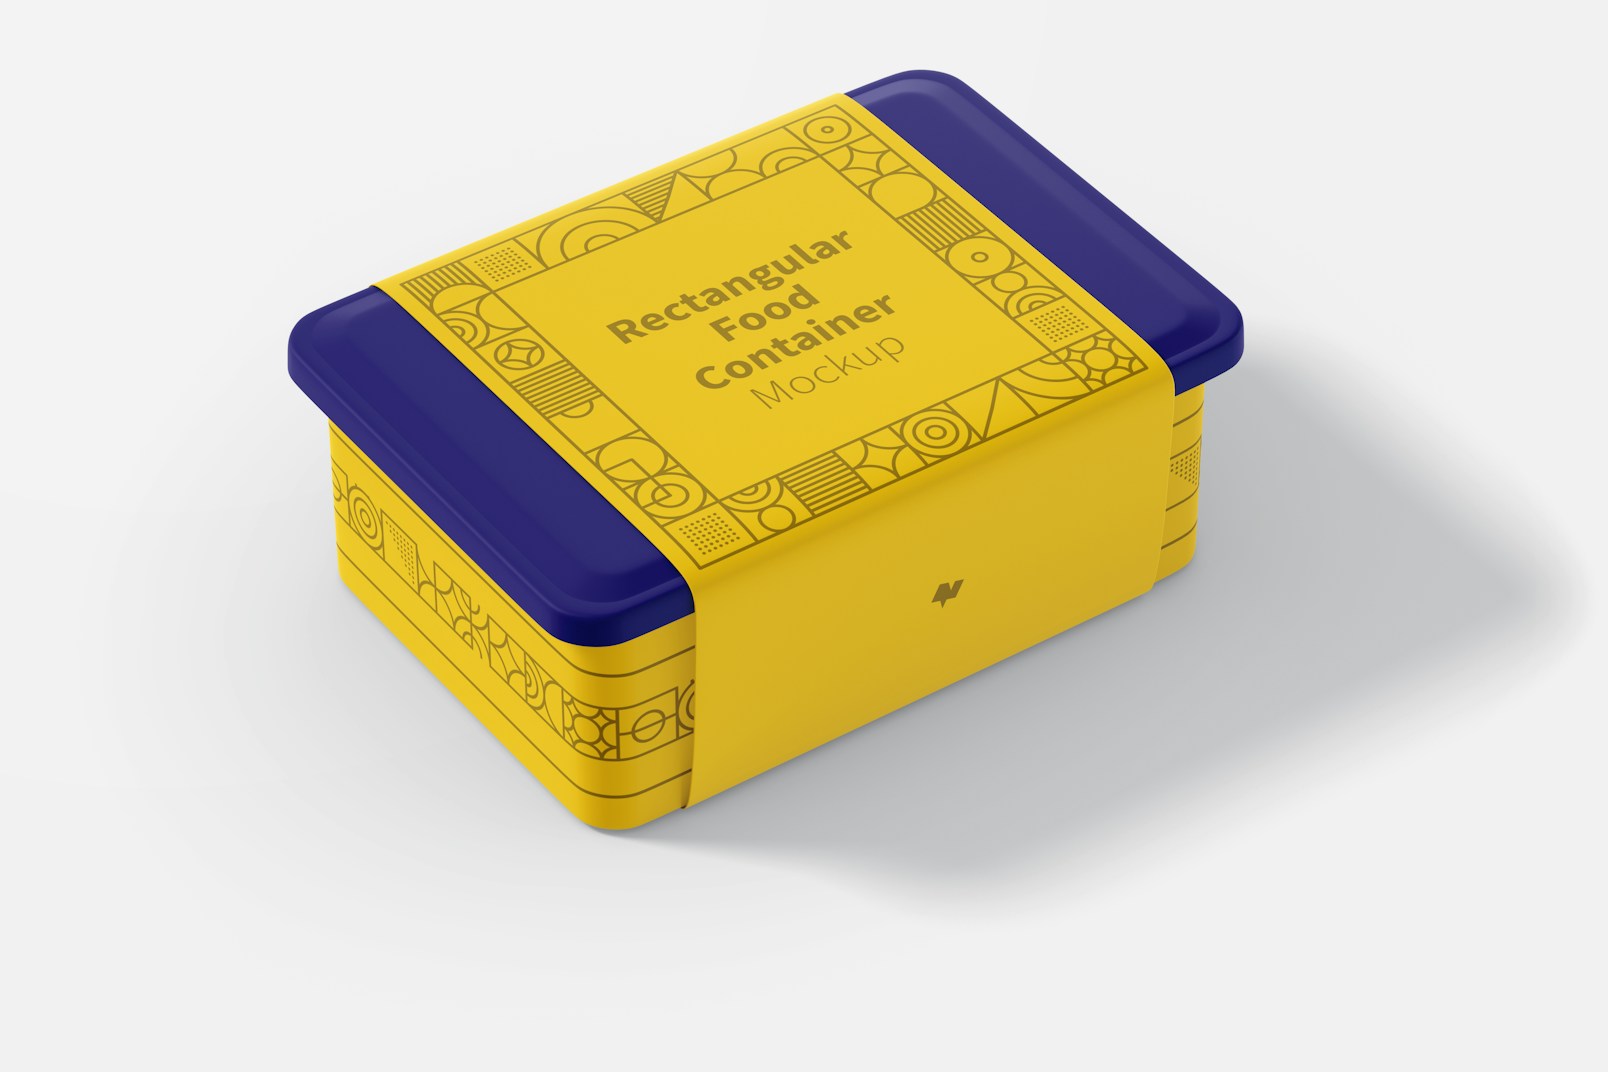 Rectangular Plastic Food Delivery Container Mockup